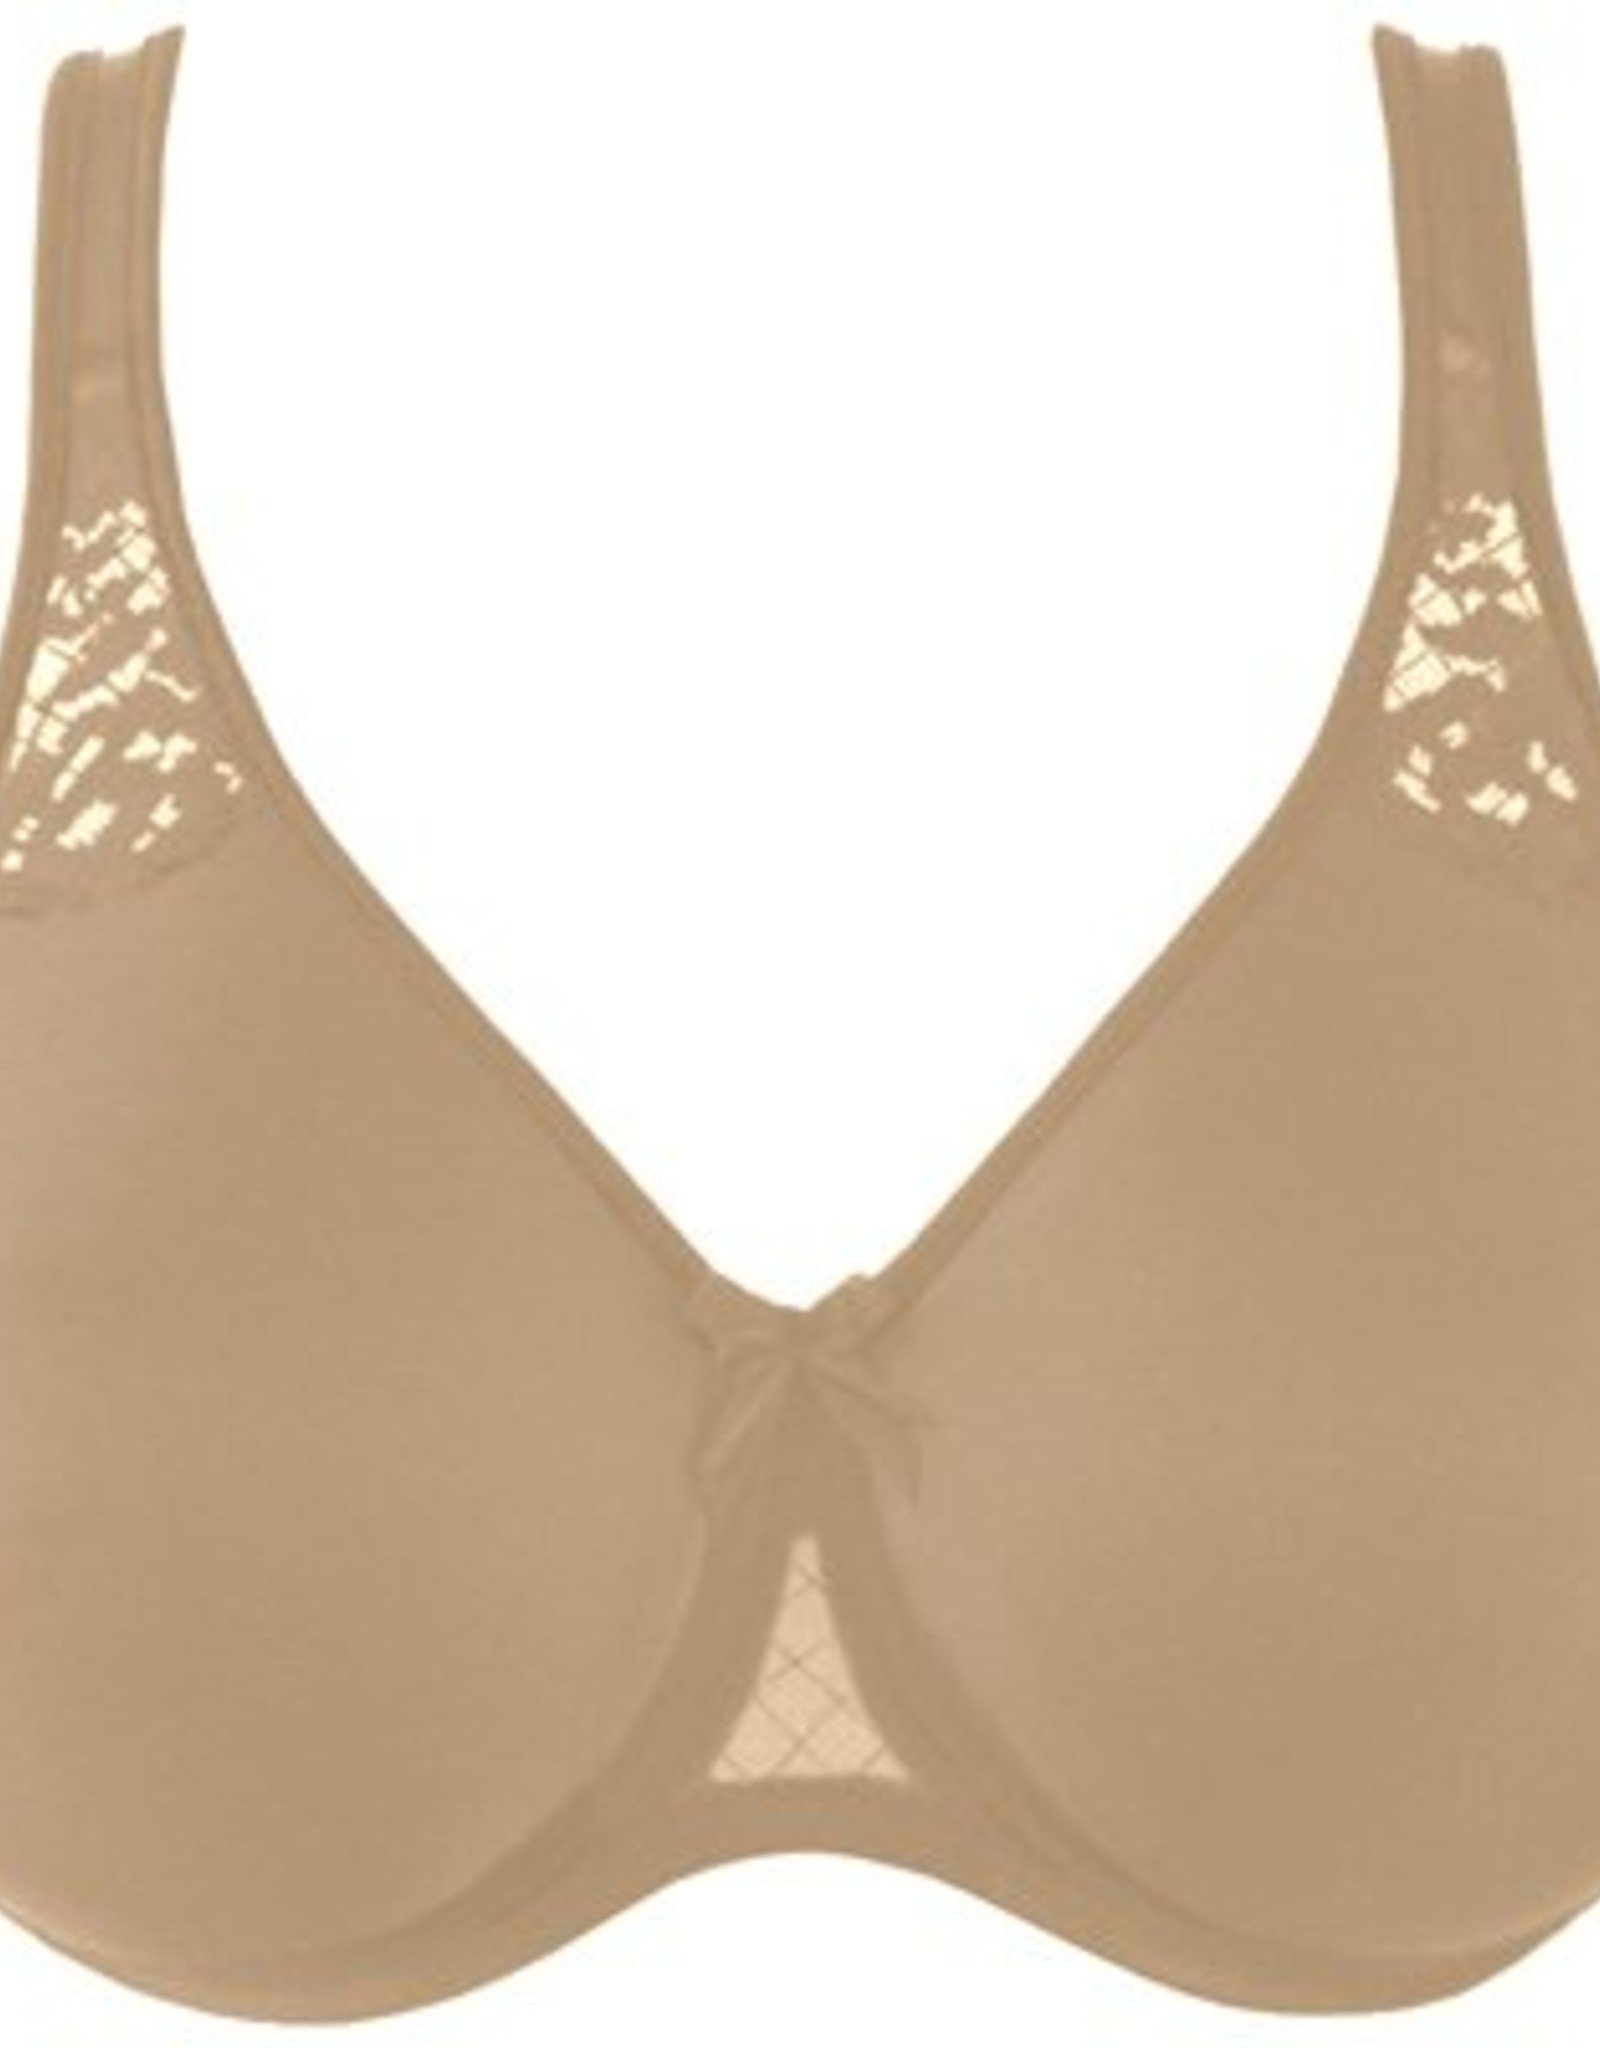 Perfectly 30 Tight by Wolford at Brachic - Brachic